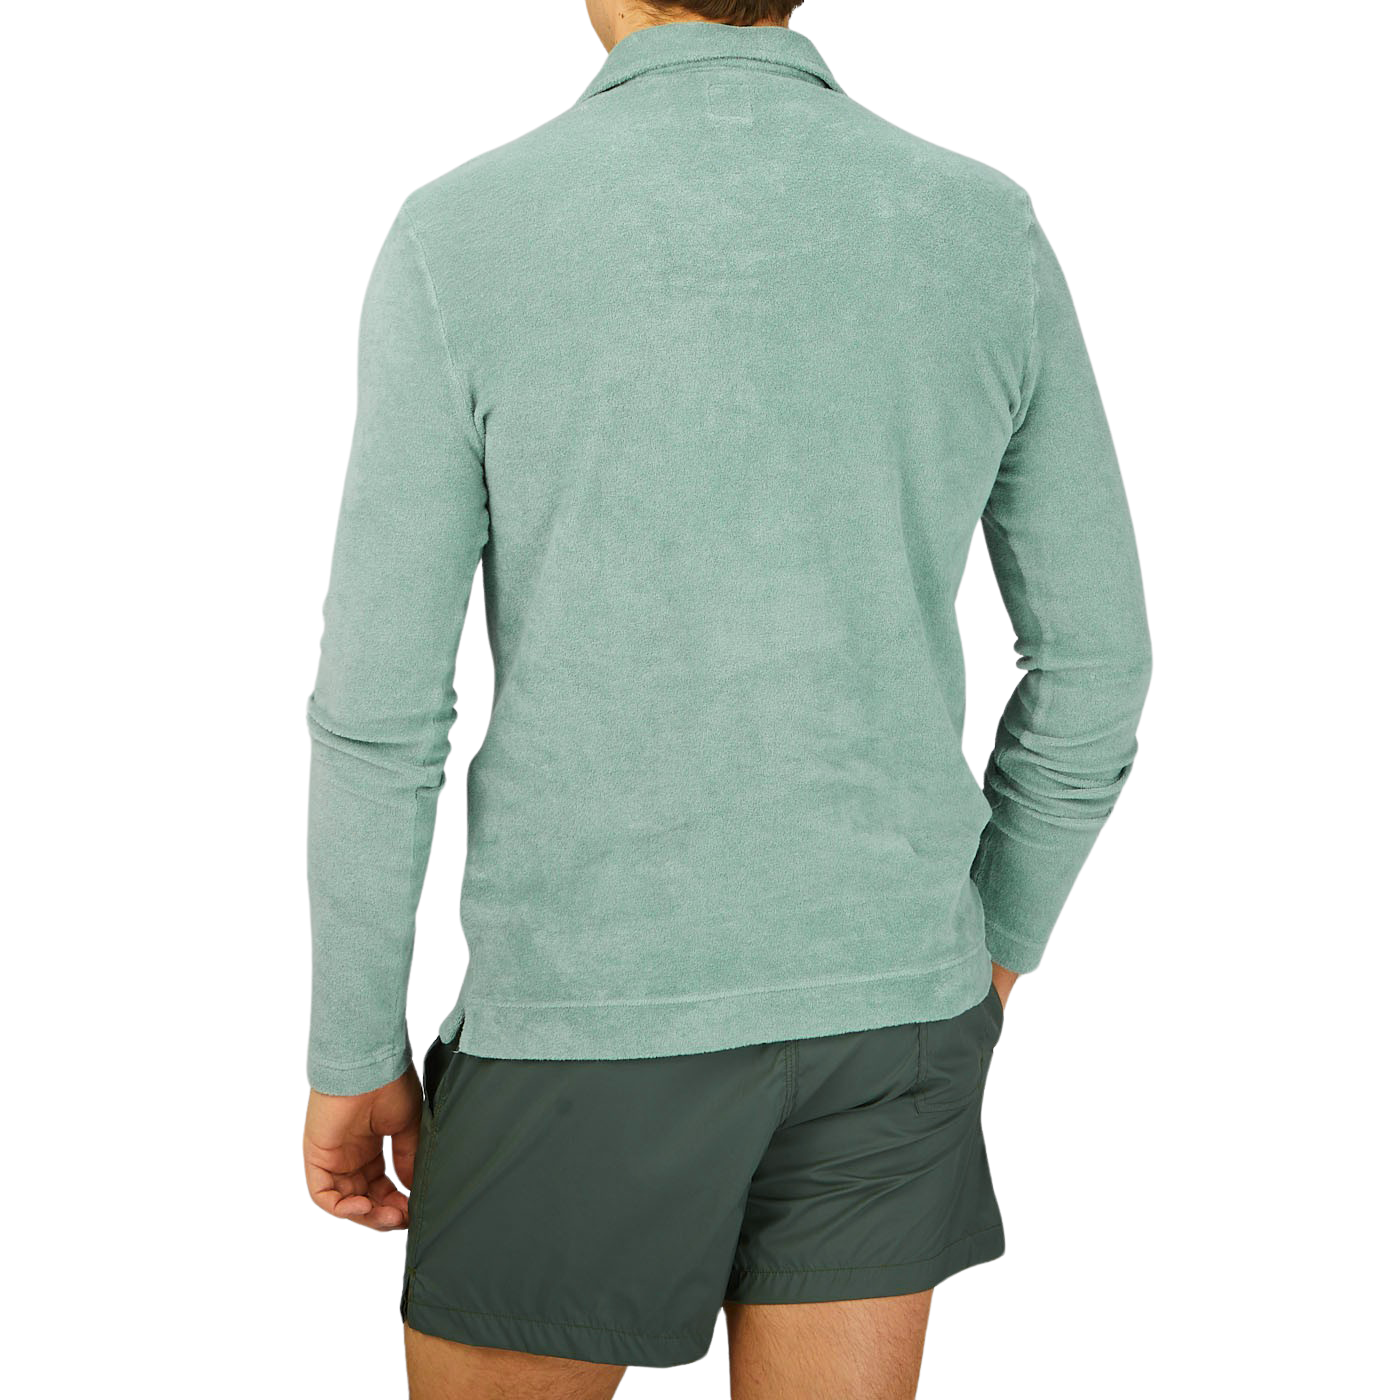 The back view of Baltzar wearing a Fedeli Light Green Cotton Toweling Shirt, his summer favorite.